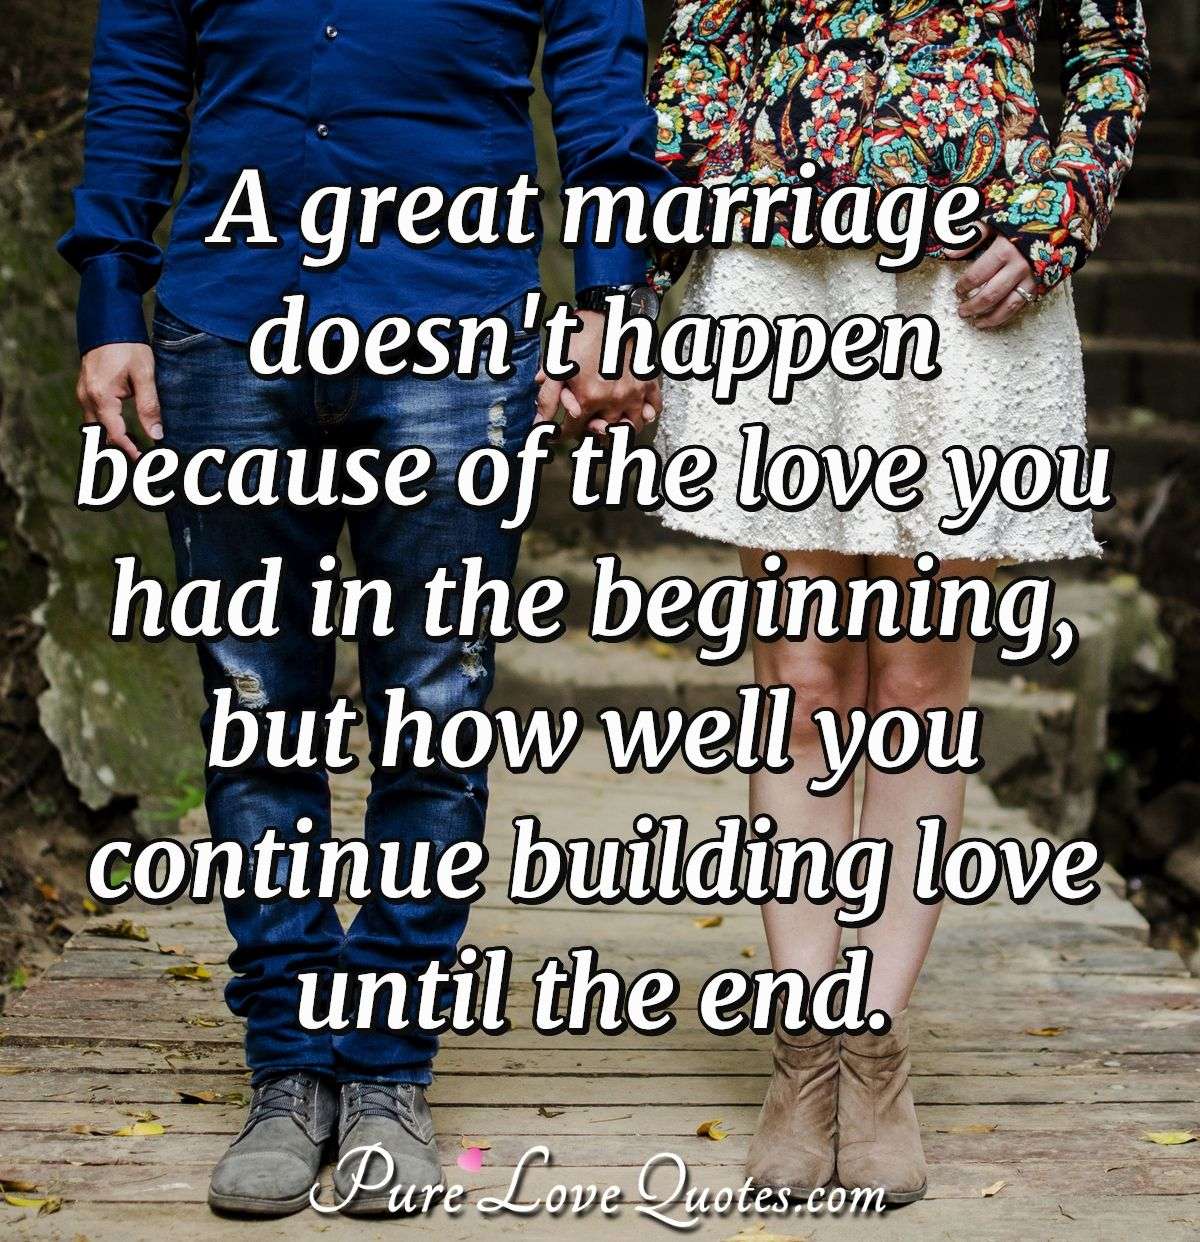 A great marriage doesn't happen because of the love you had in the beginning but how well you continue building love until the end. - Anonymous